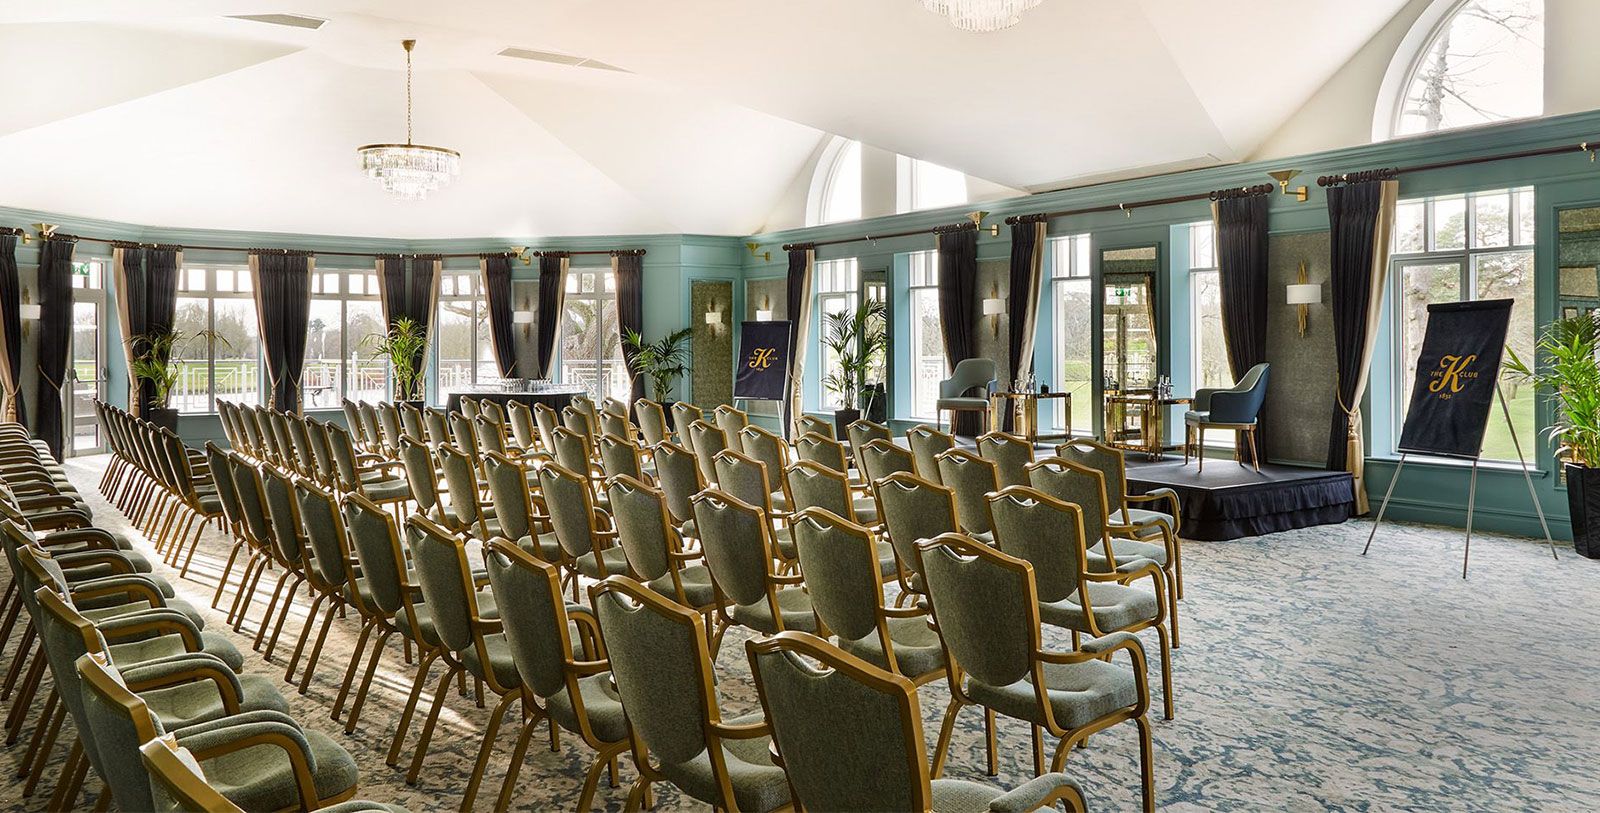 Image of Palmer Theatre at The K Club, 550, Member of Historic Hotels Worldwide, in Straffan, County Kildare, Ireland, Venues & Services